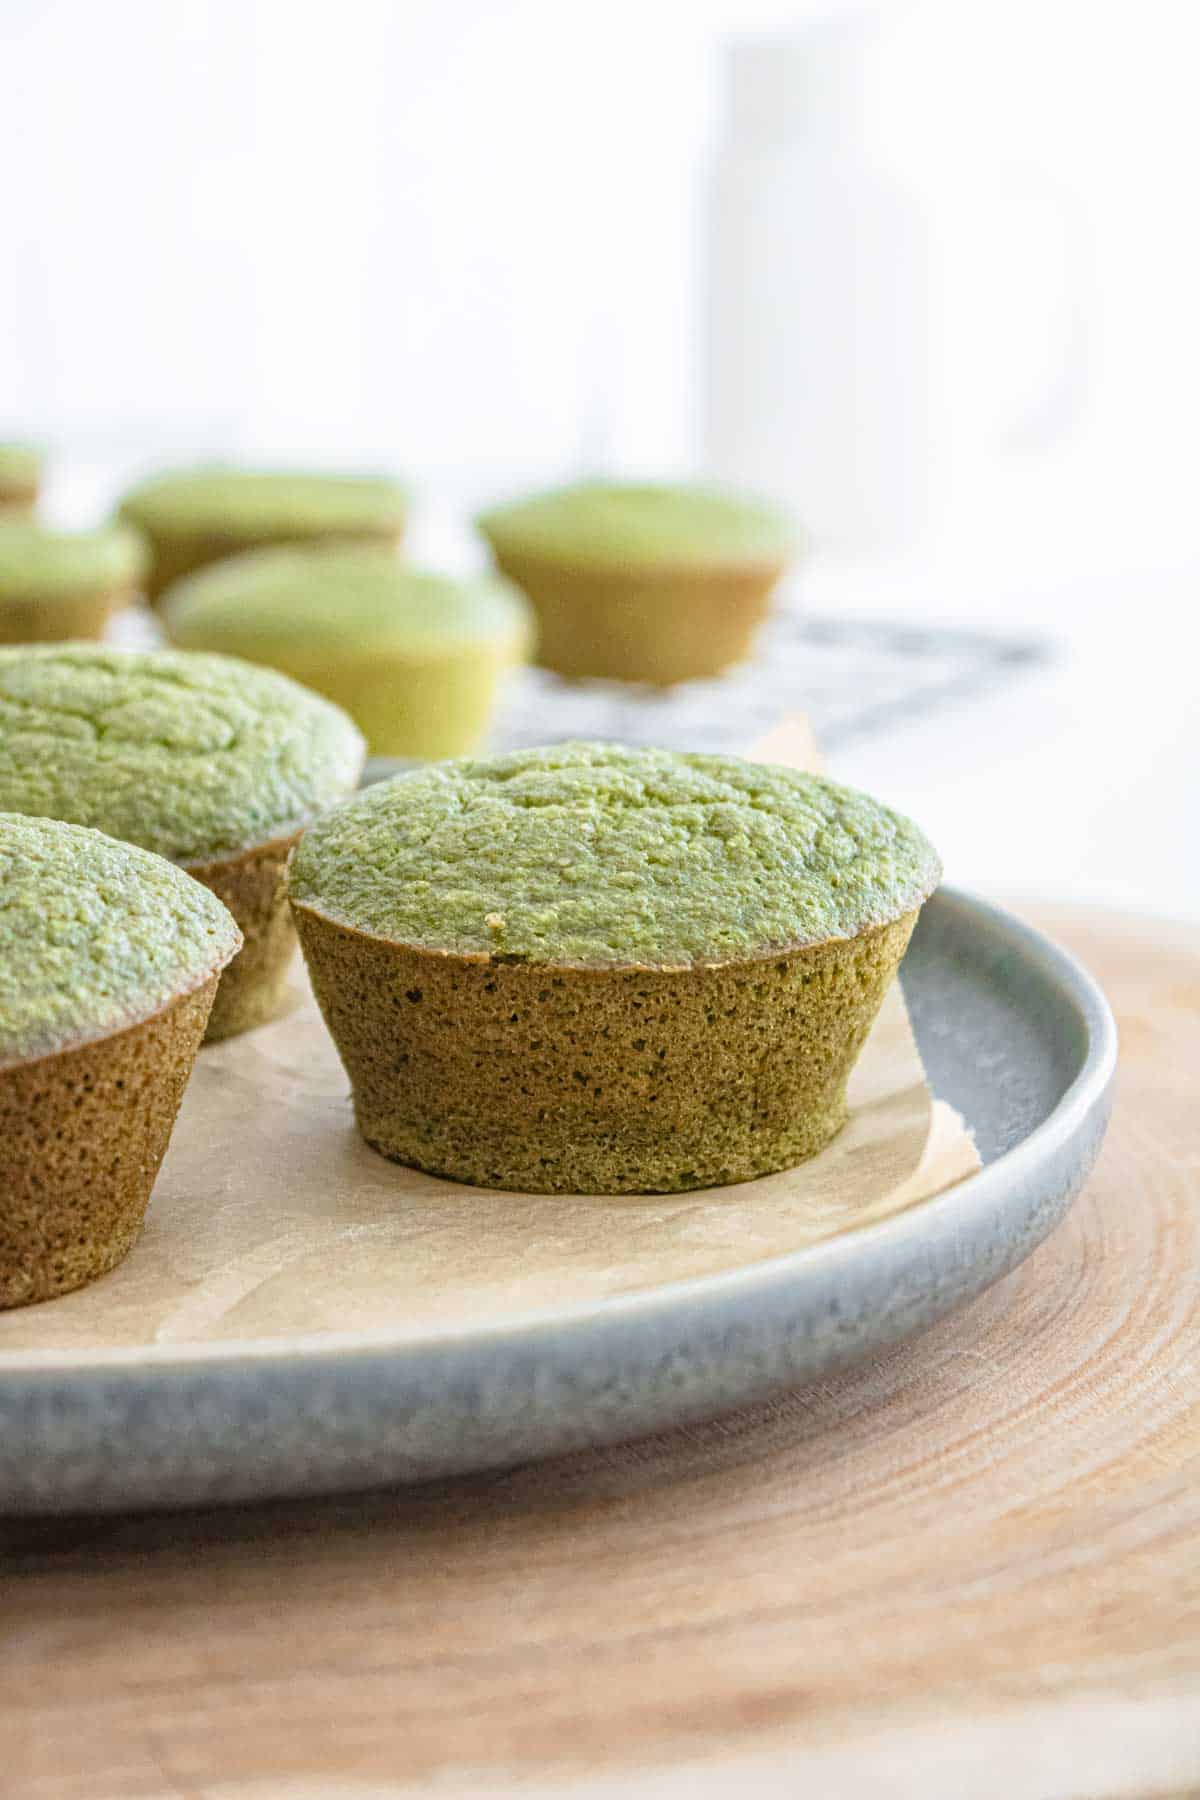 Green spinach and banana muffins on a plate.